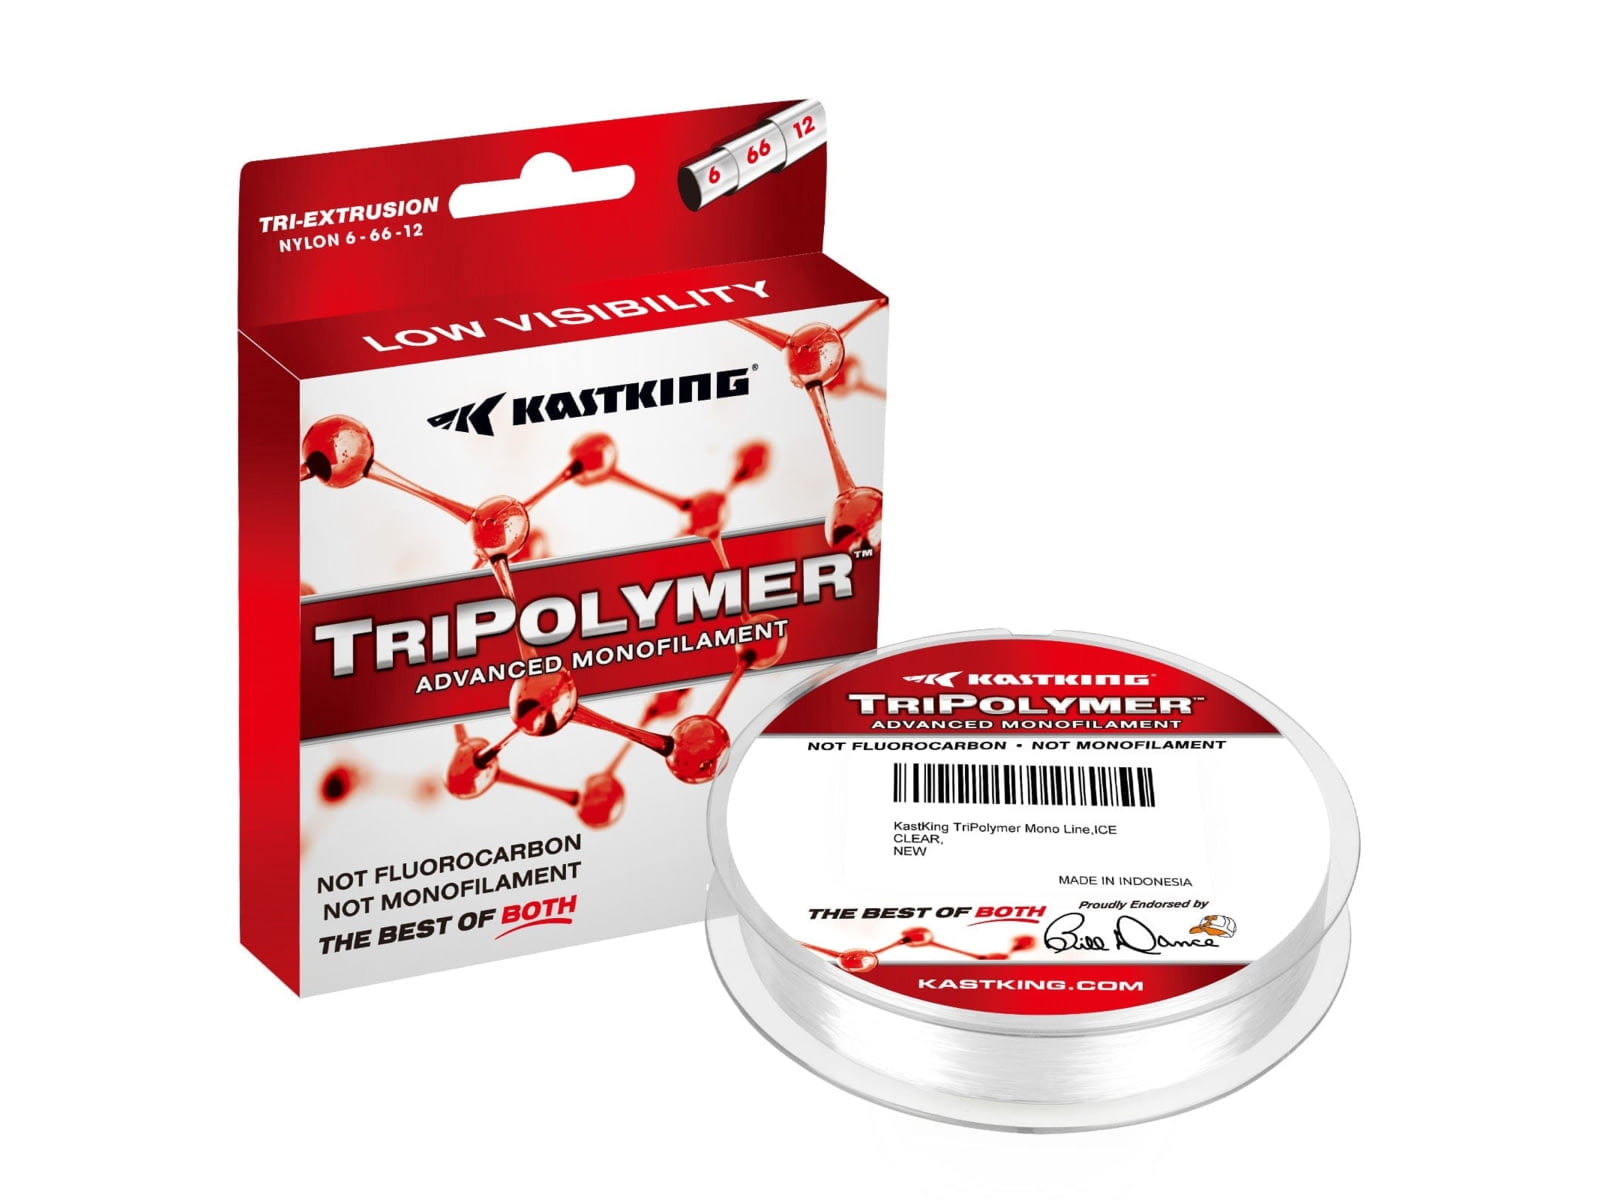 Kast King TriPolymer Advanced Monofilament Fishing Line, Ice Clear